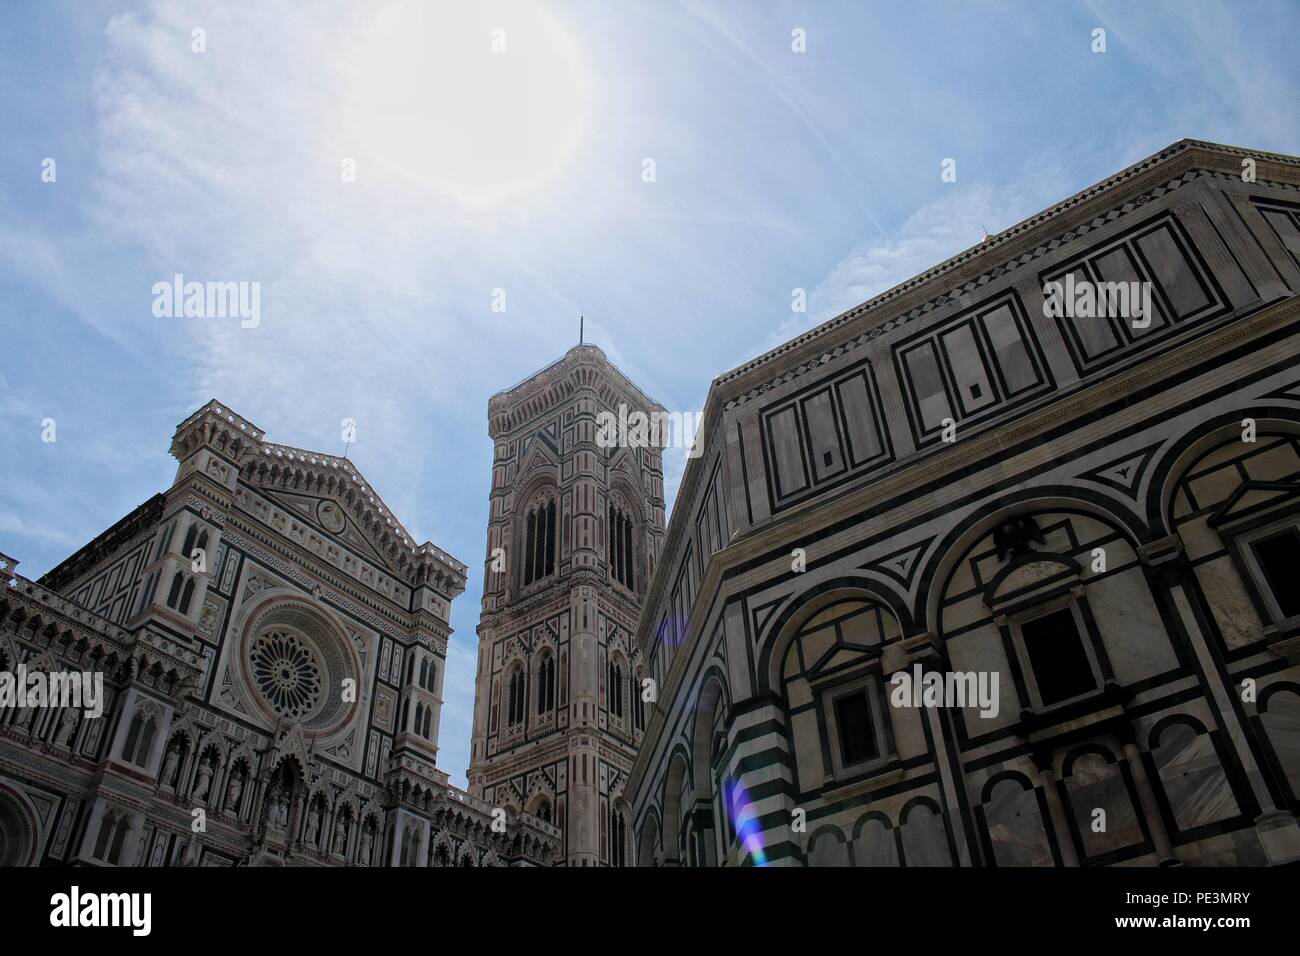 A low angle view of the facade and decorative details of Il Duomo cathedral in Florence, Italy Stock Photo